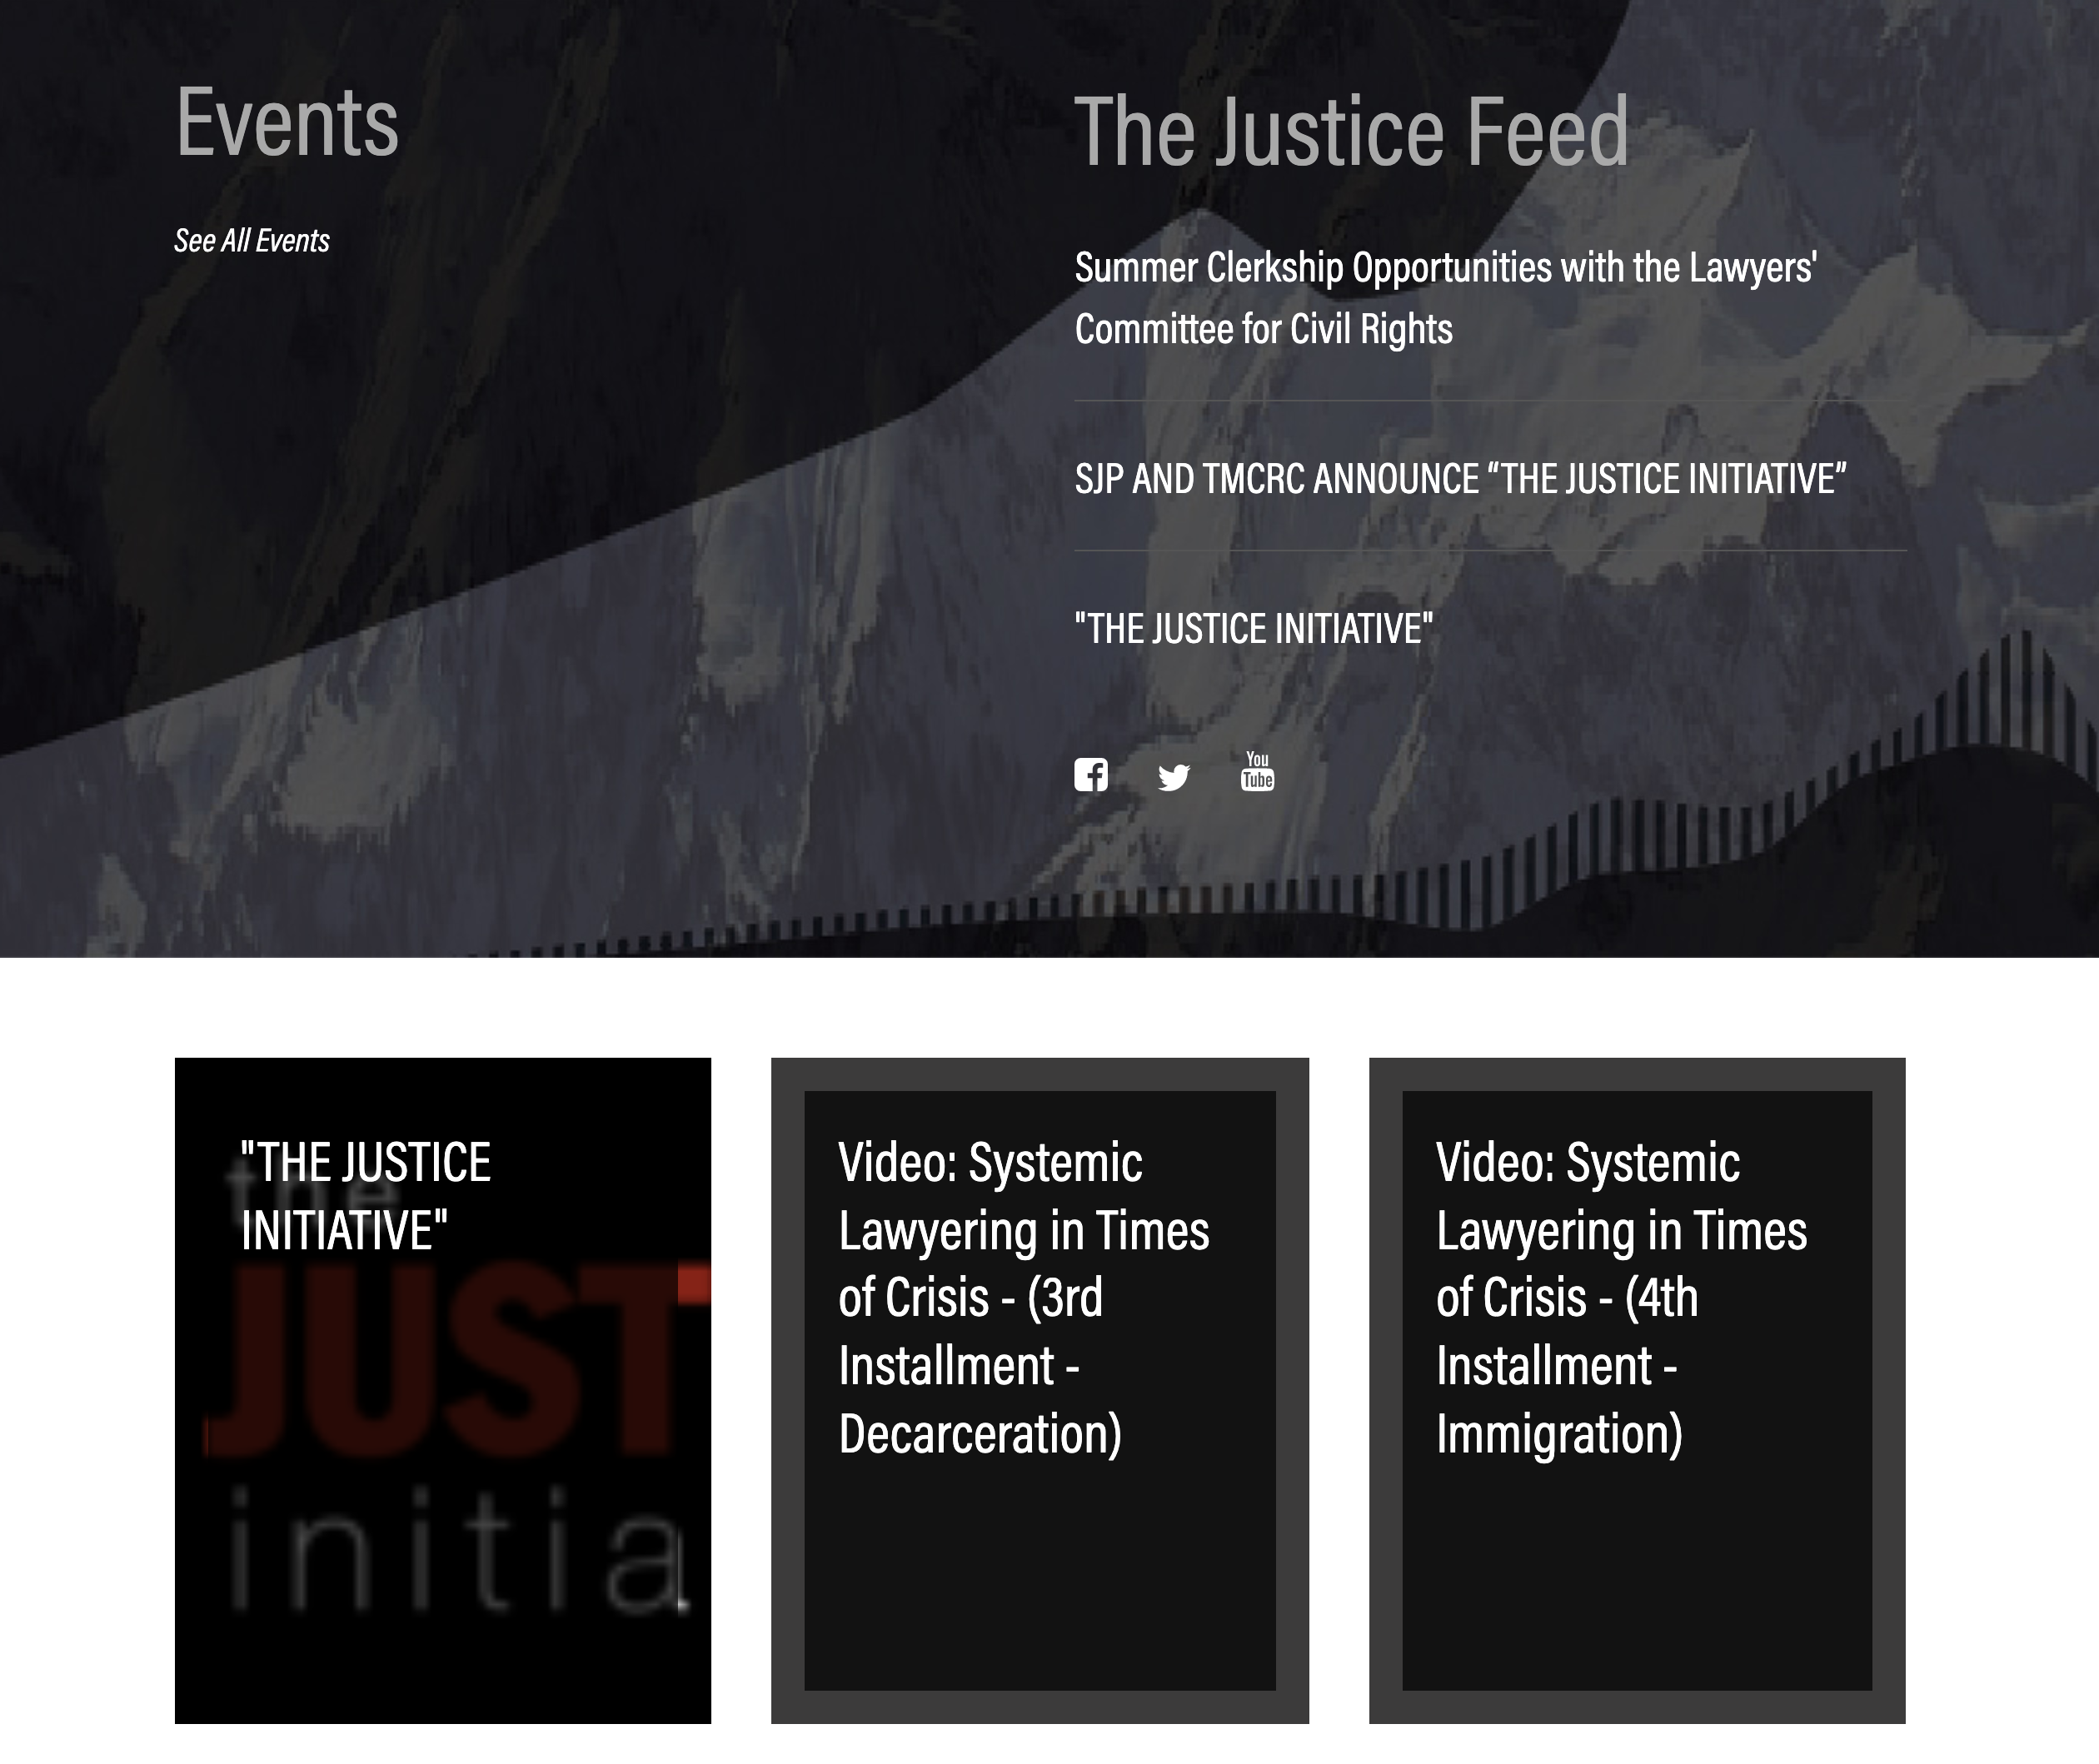 Harvard Law School - Systemic Justice Project: Harvard Law School Systemic Justice Project - Events